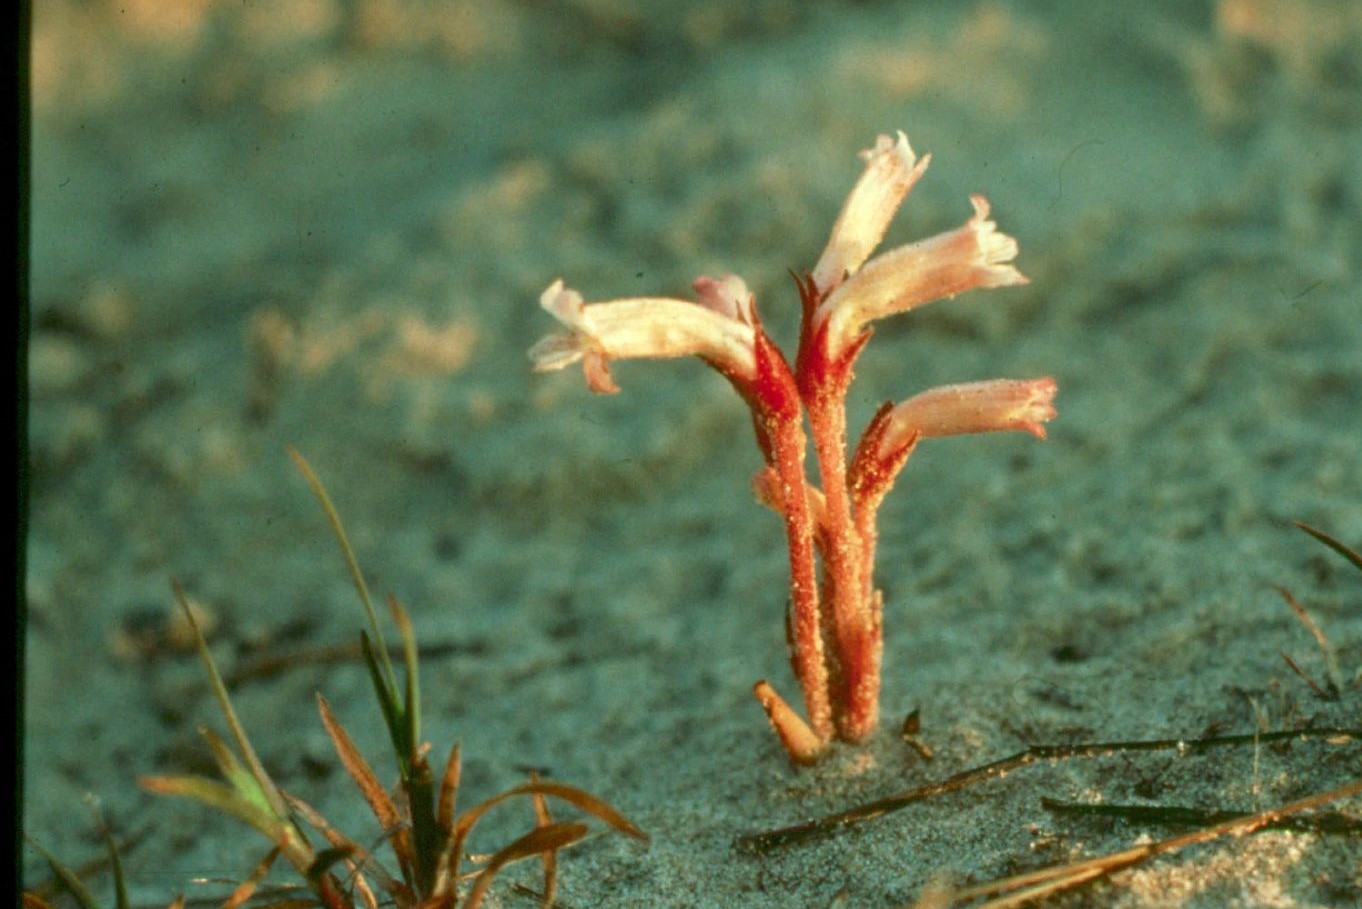 A small plant with red stems and white flowers grows in sand